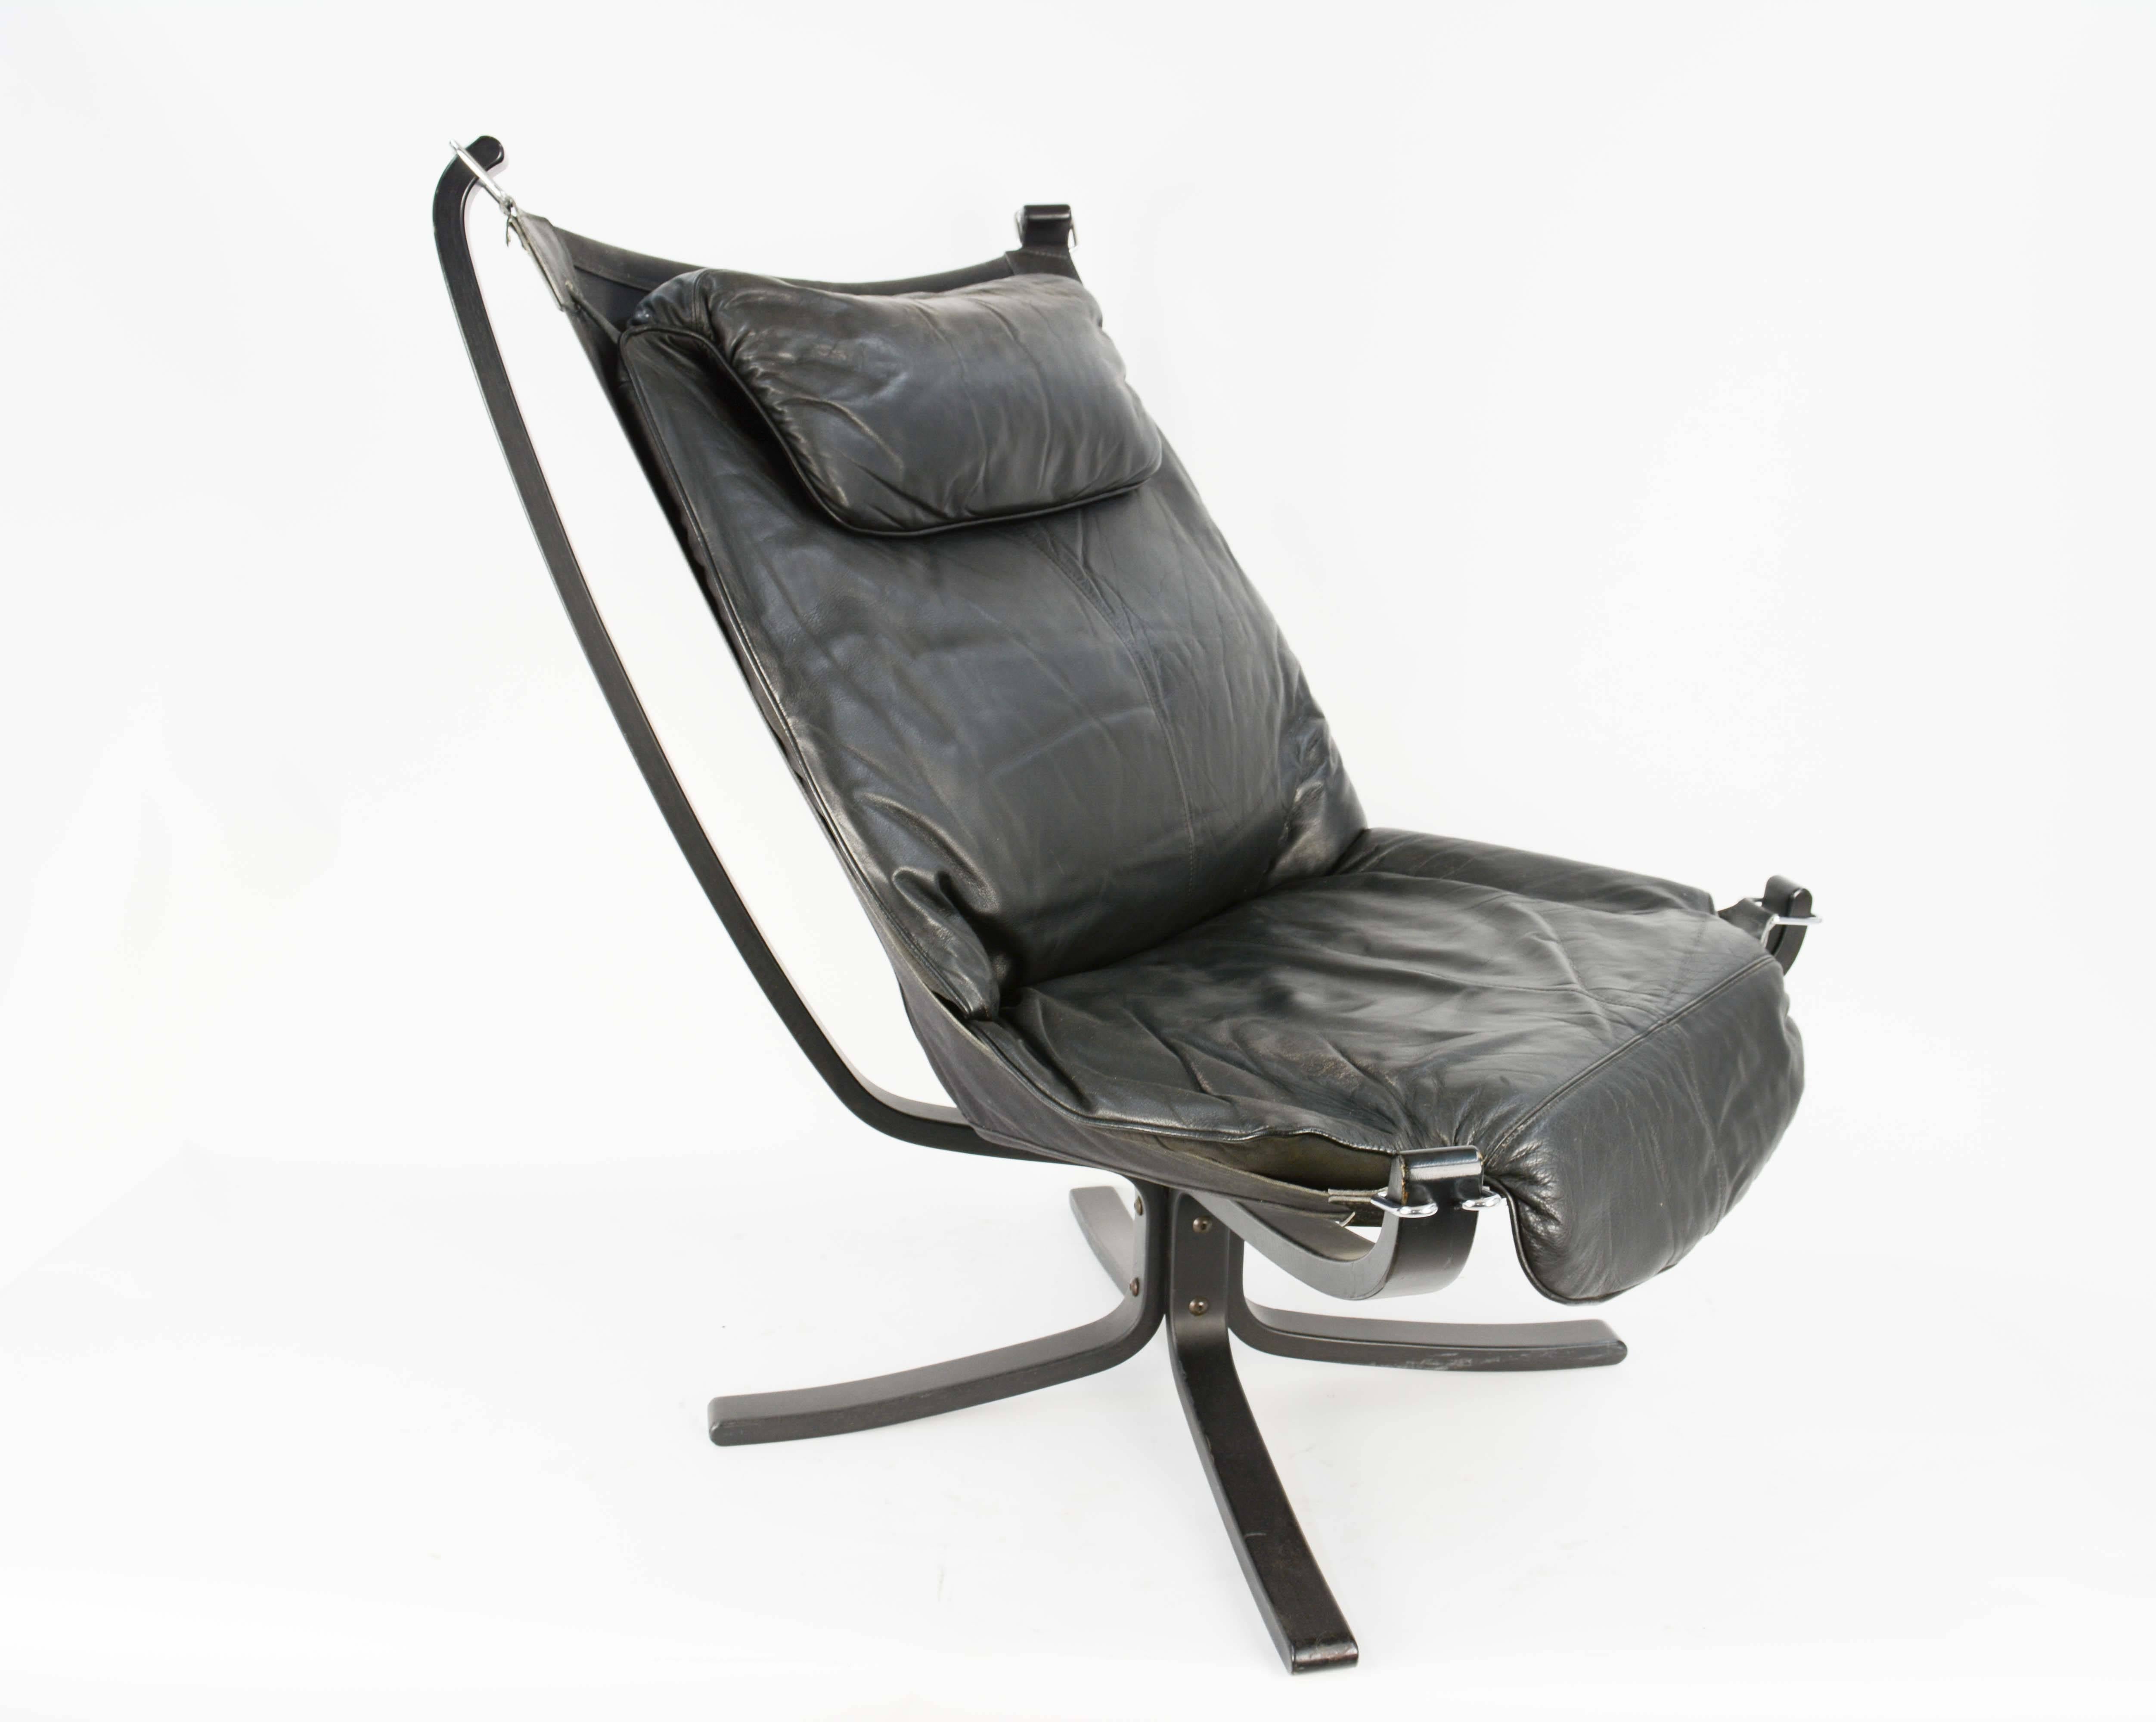  Two Pairs of Black on Black Falcon Chairs by Sigurd Resell for Vatne Møbler In Good Condition For Sale In Portland, OR